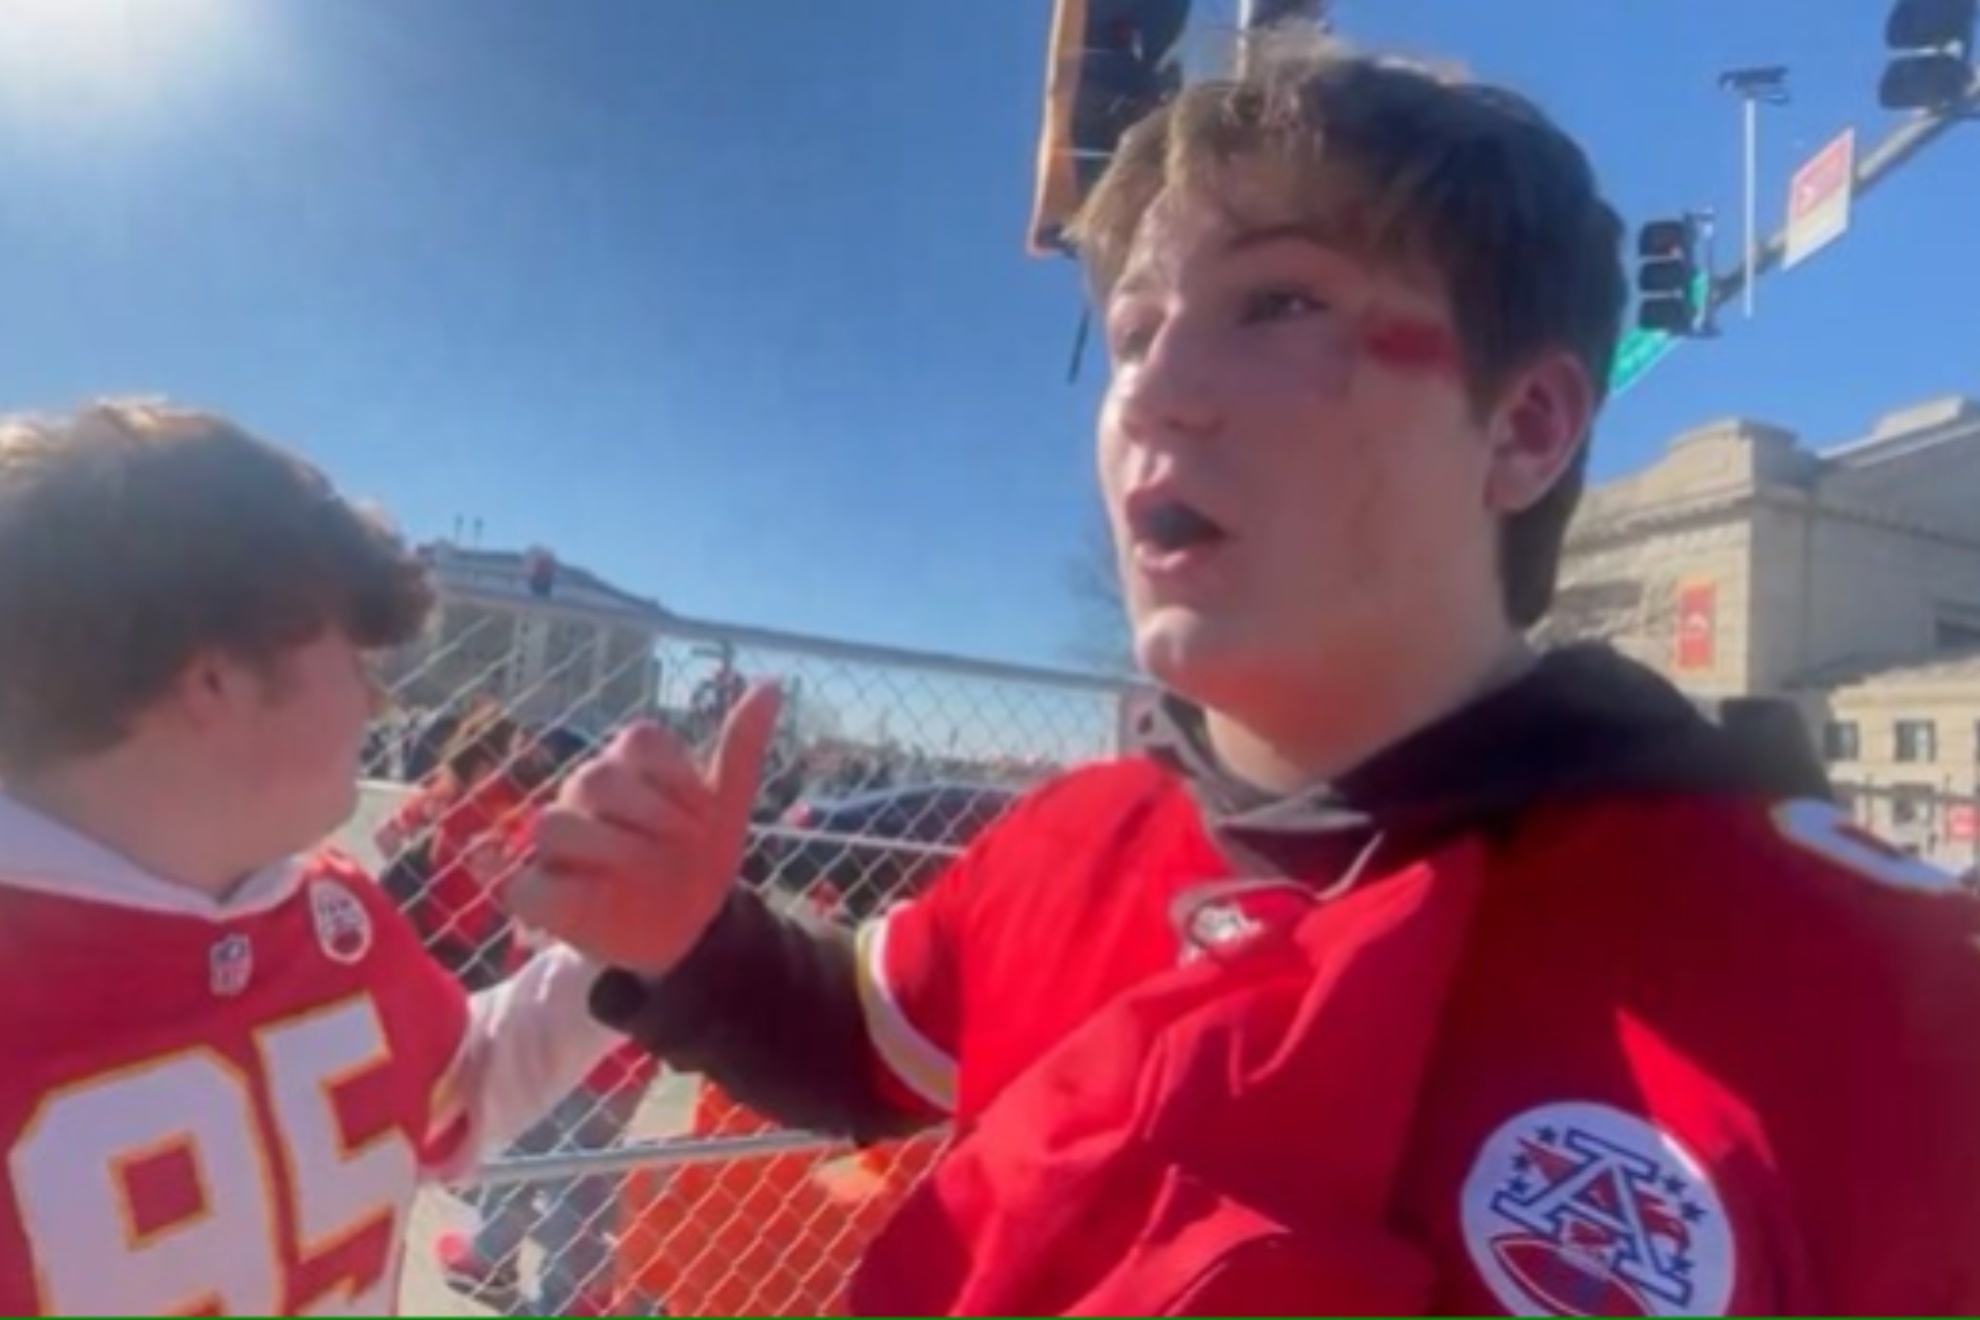 Teen says Chiefs head coach Andy Reid tried to comfort him after Kansas City shooting